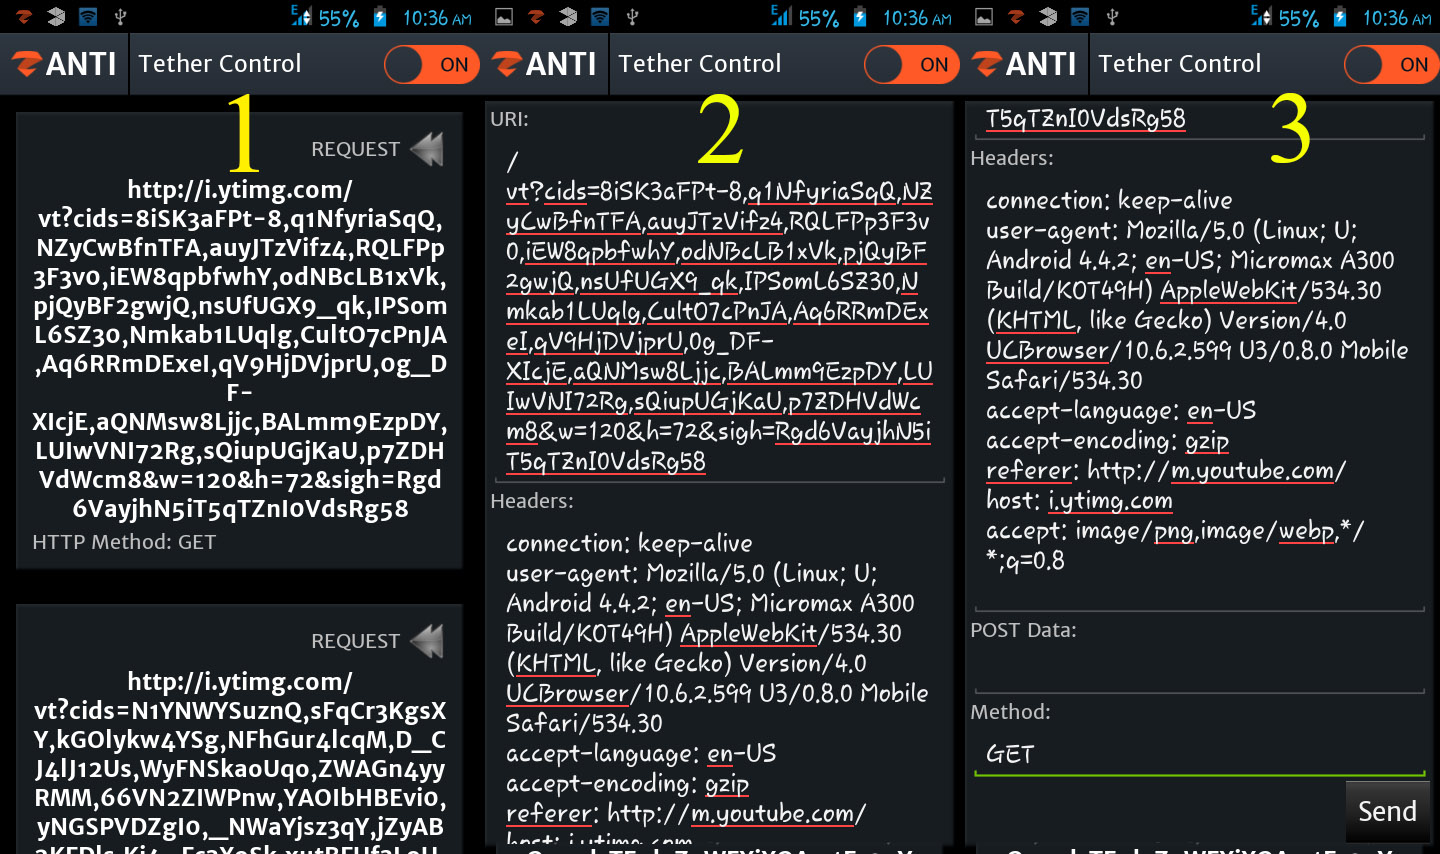 How to do a MITM attack with android phone using zanti